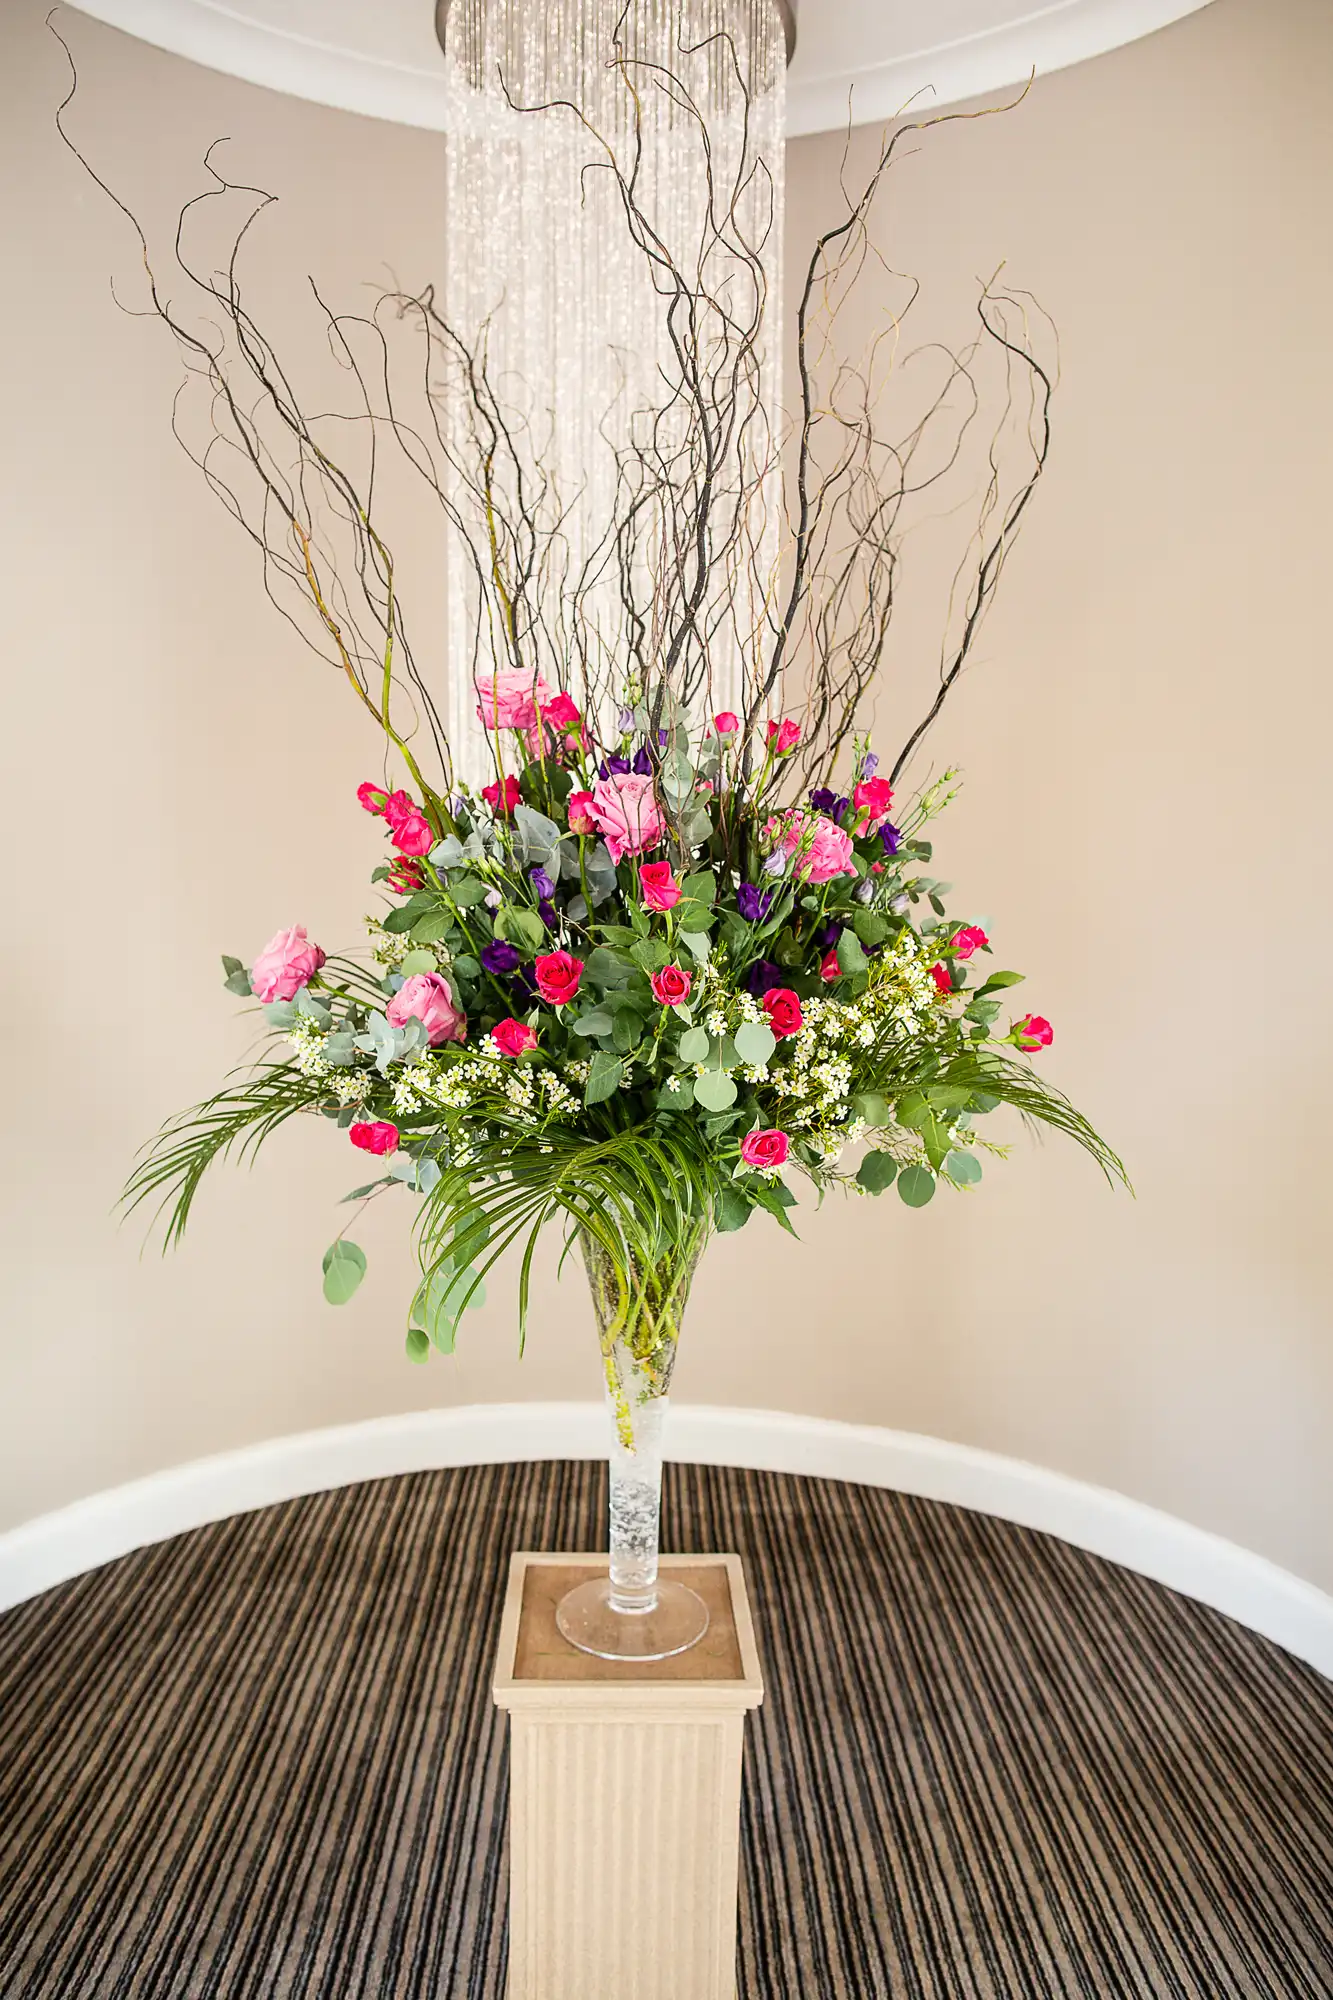 Elegant floral arrangement with pink roses and green foliage in a tall glass vase on a pedestal, under a crystal chandelier.